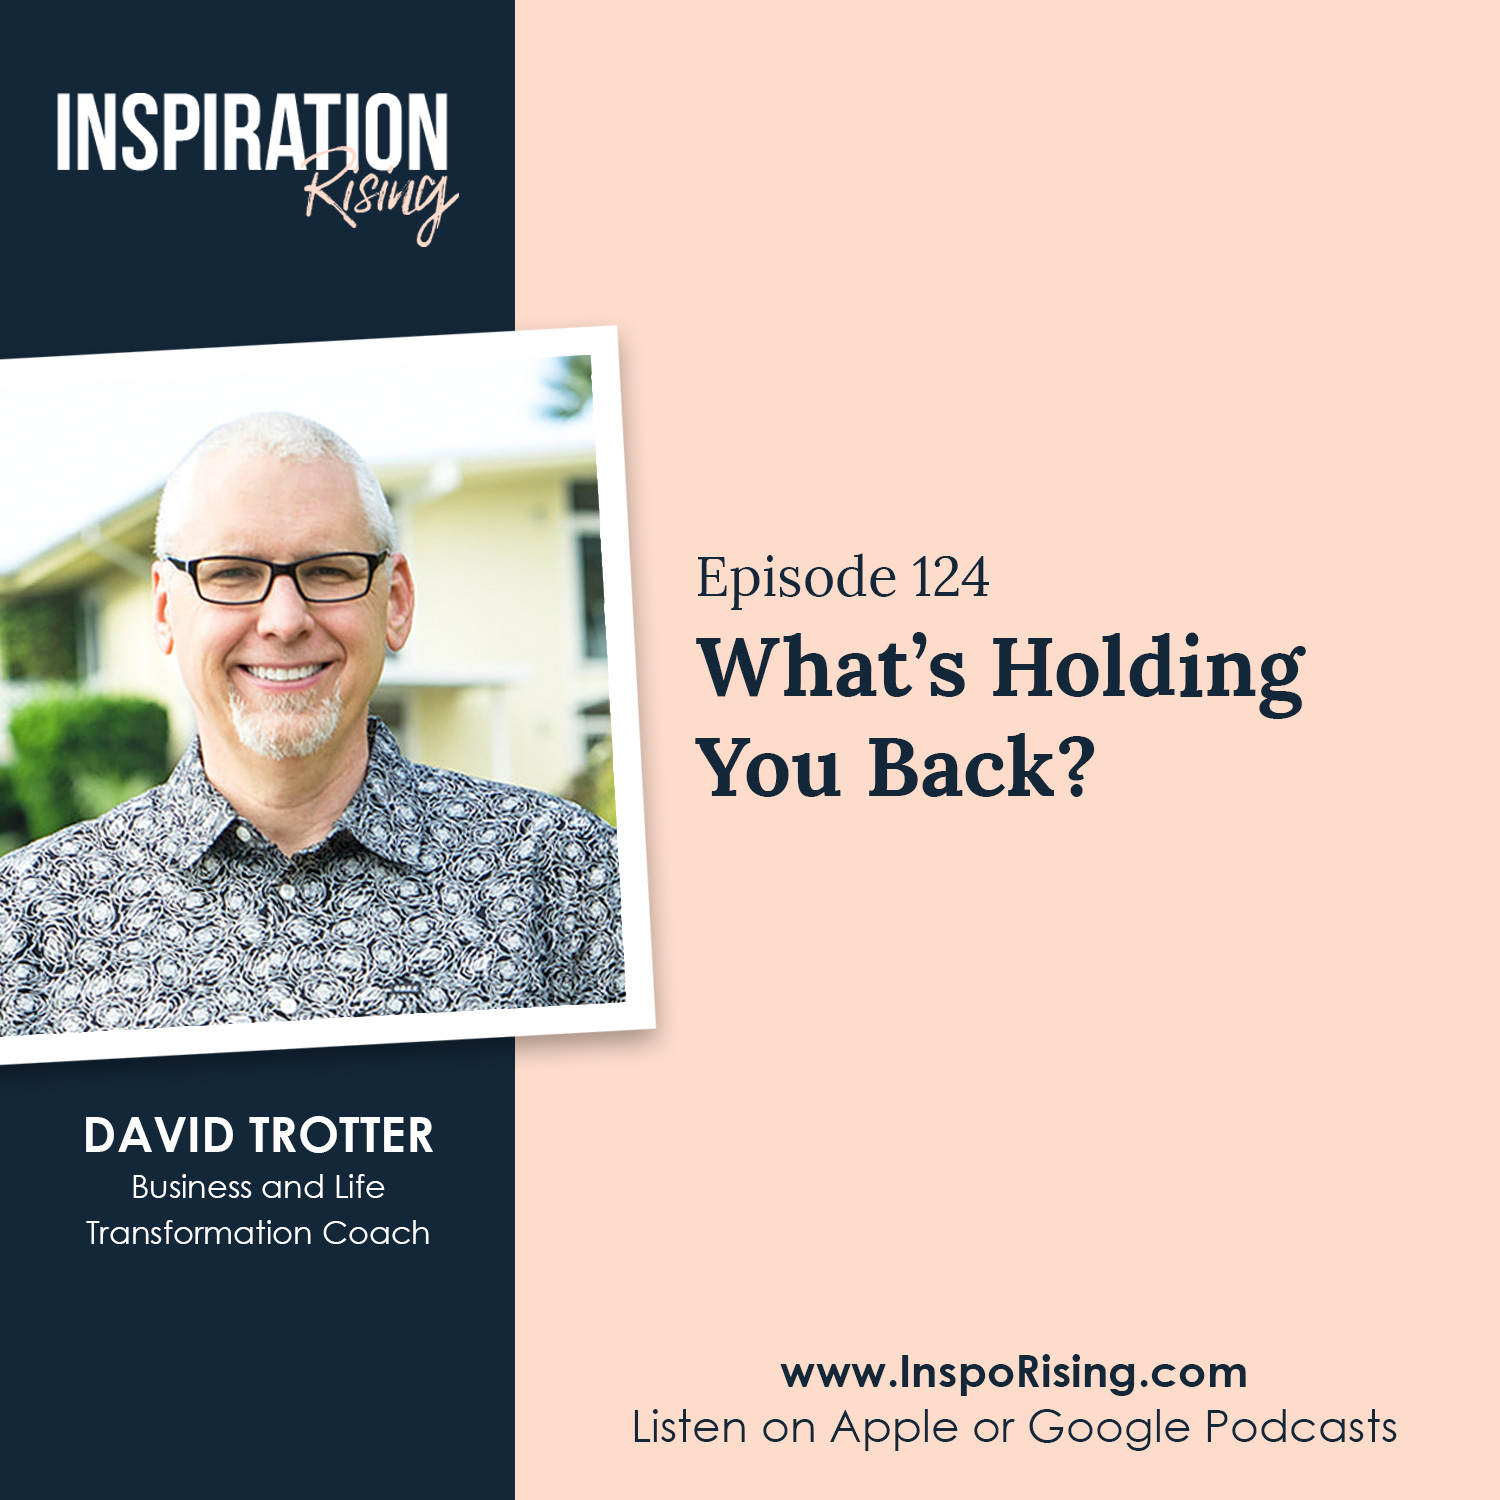 David Trotter - Business and Life Transformation Coach